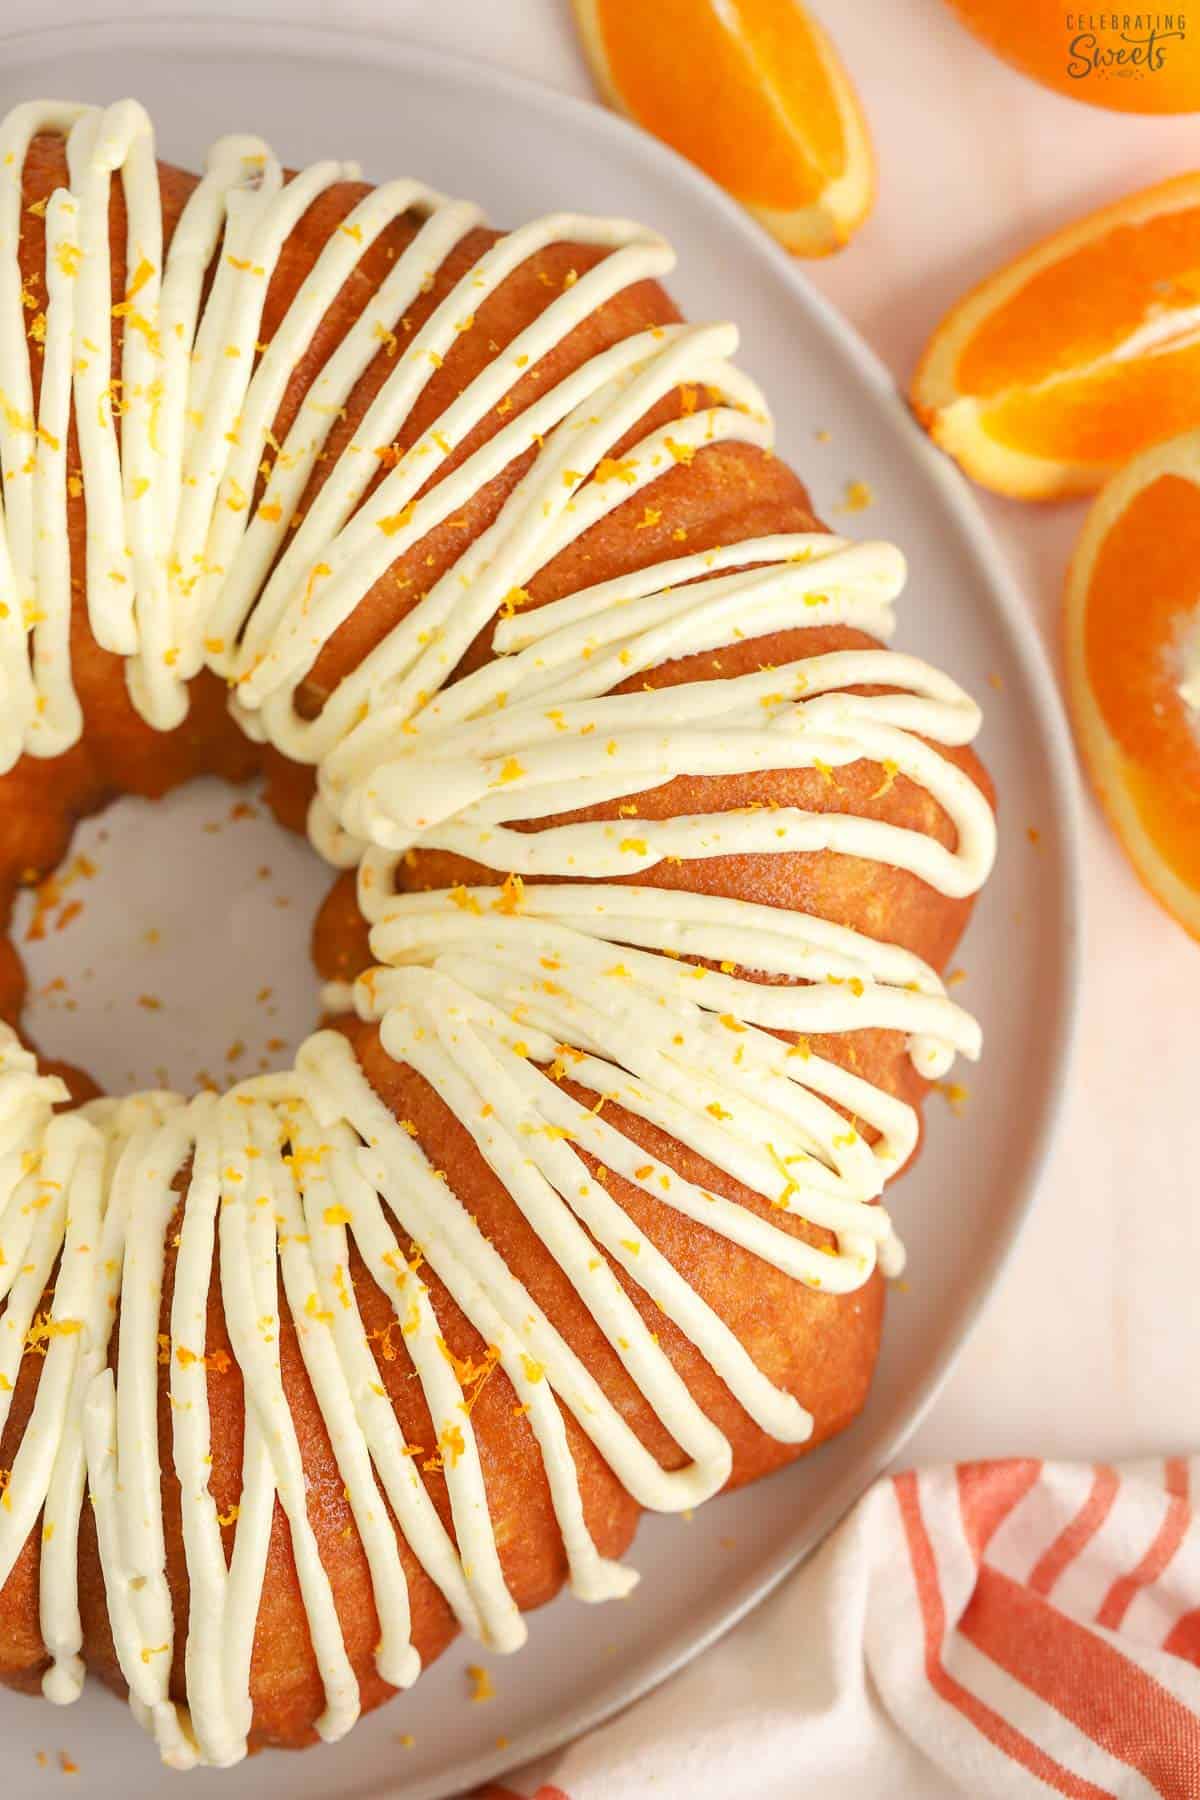 Overhead shot of an orange bundt cake drizzled with white icing.